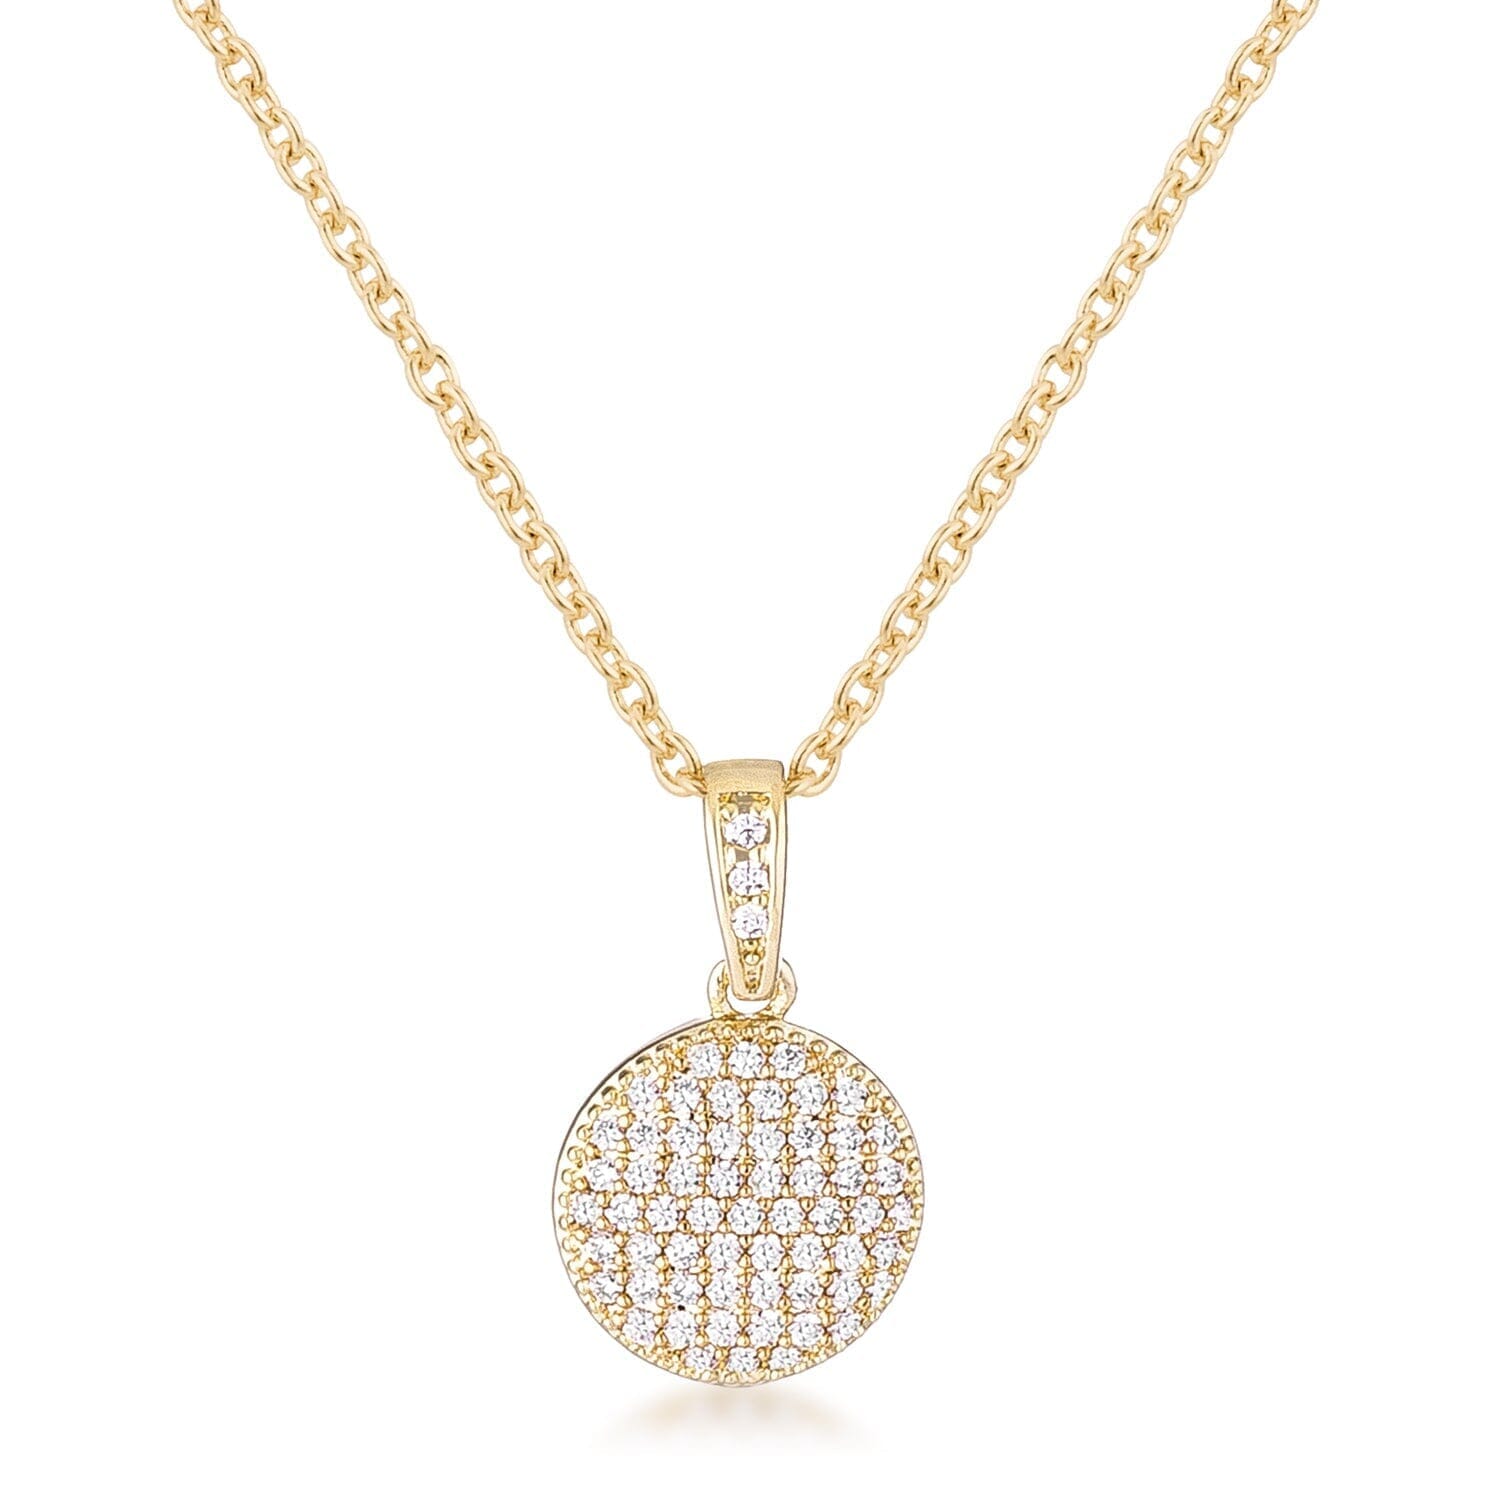 Gold Plated Necklace with Cubic Zirconia Disk Pendant Pendants Das Juwel 